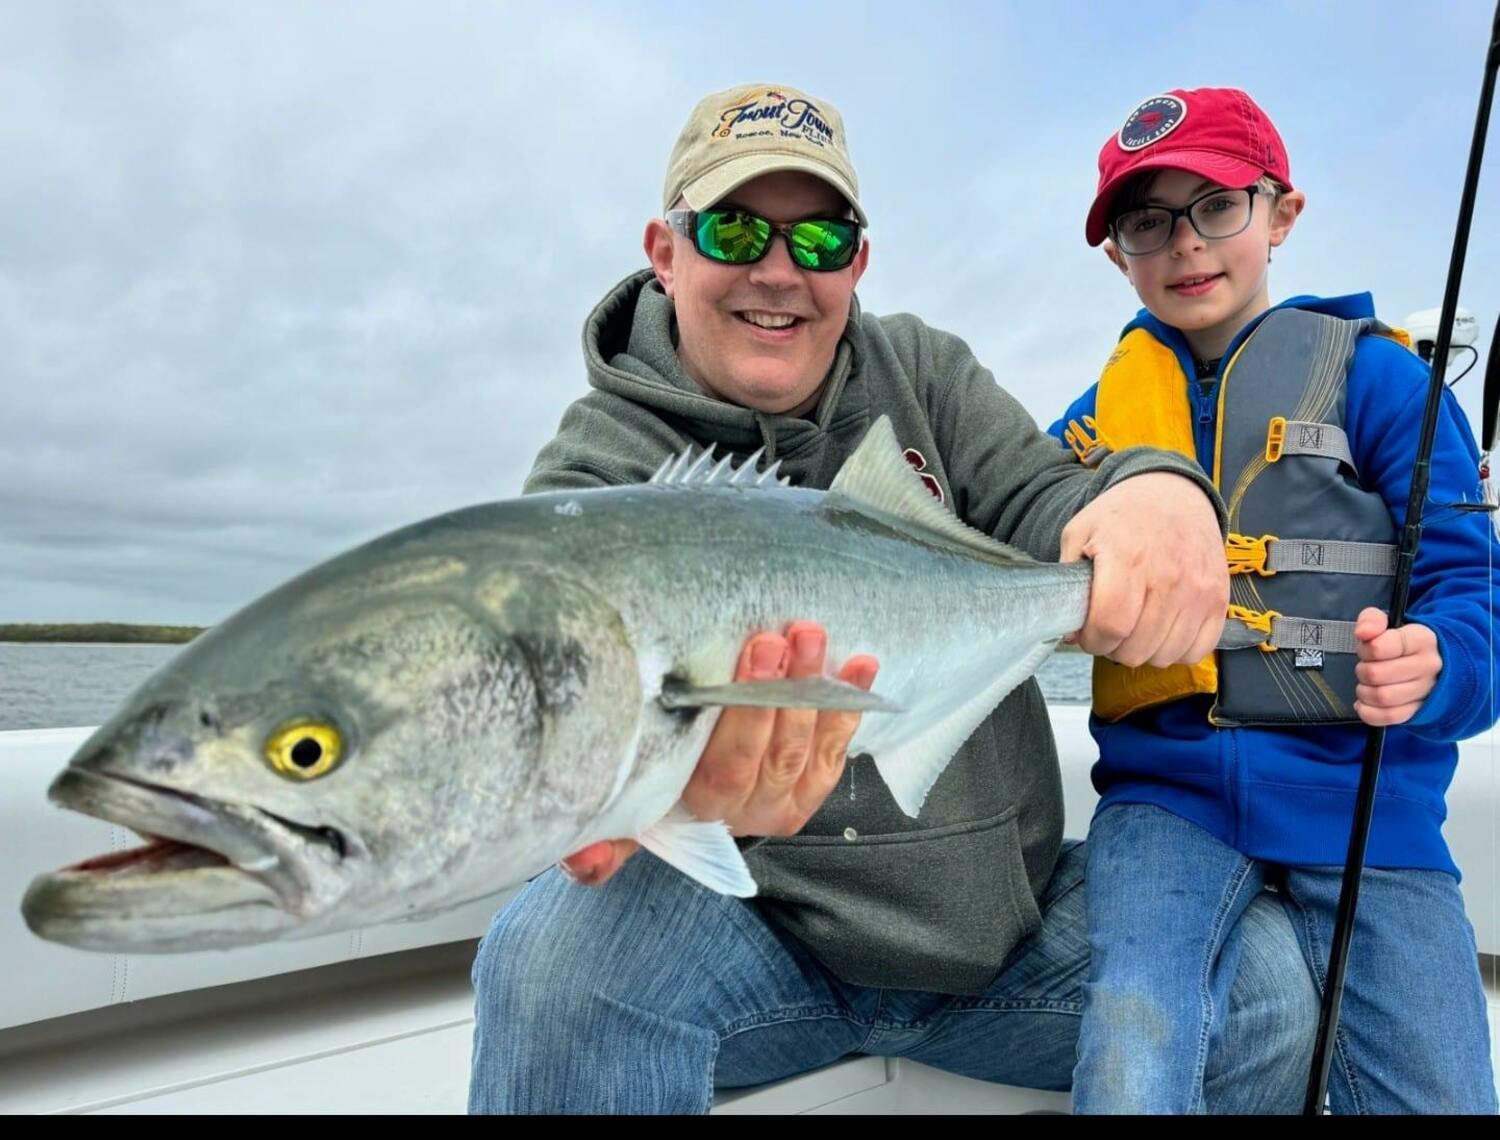 Chris and Daniel Geminski caught some of the big bluefish lurking in Shinnecock Bay this month.